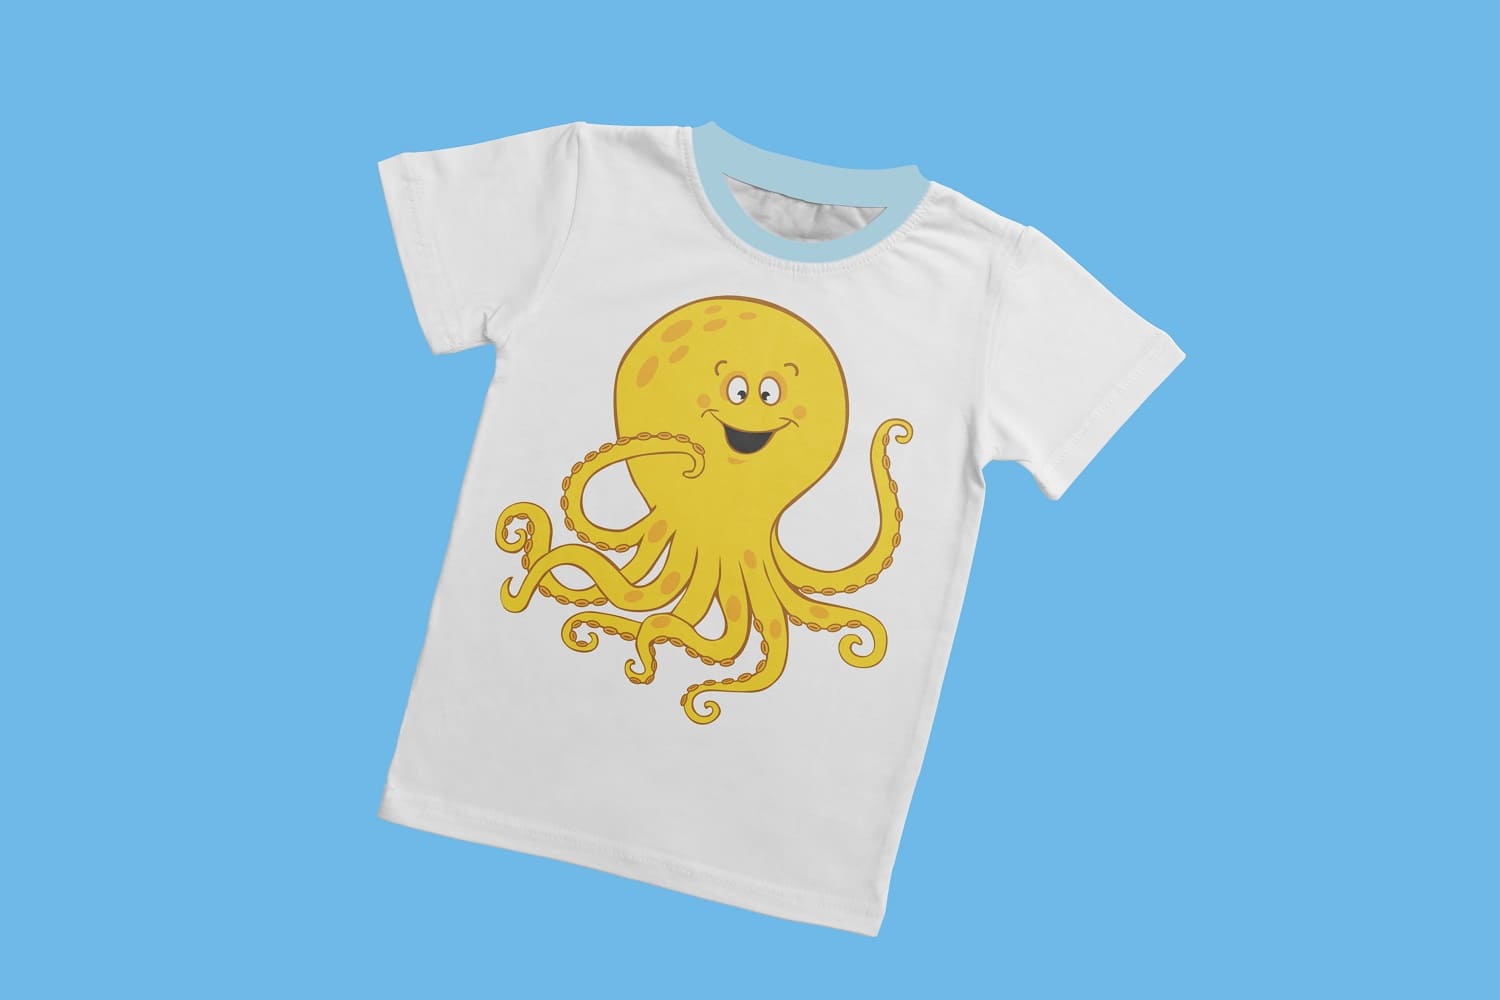 Funny white t-shirt design with a yellow octopus on a blue background.